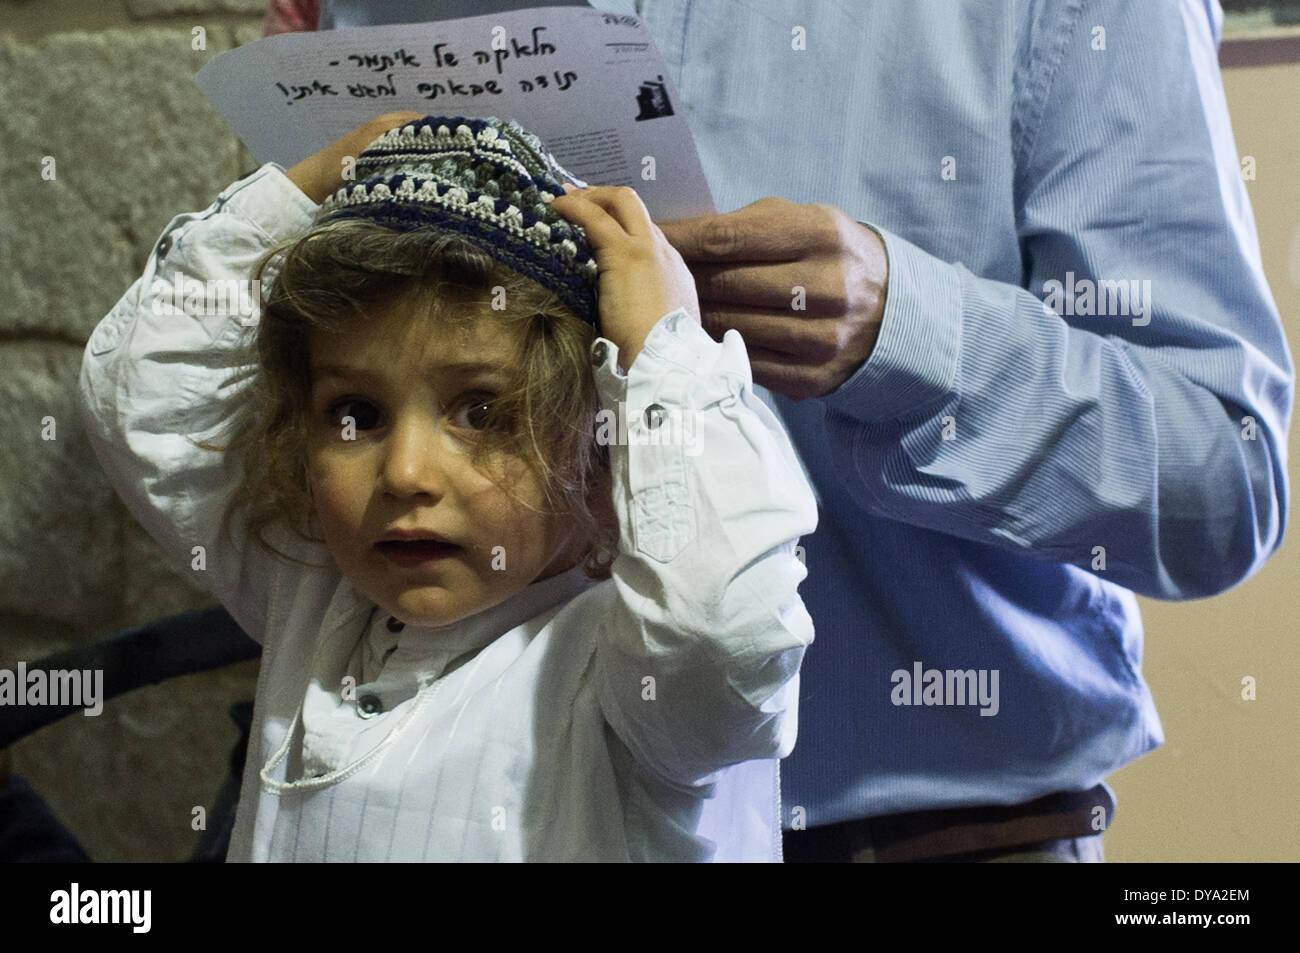 A family performs a Halaqah (Sephardic Jews) or Upsherin (Ashkenazi Jews) ceremony at the tomb of the Prophet Samuel, cutting their three-year-old son's hair for the first time. This is the traditional burial site of the biblical Prophet Samuel, just north of Jerusalem. The tomb is located in an underground chamber inside a small synagogue in the 18th century Nabi Samwil Mosque, built on the remains of a Crusader-era fortress. Stock Photo